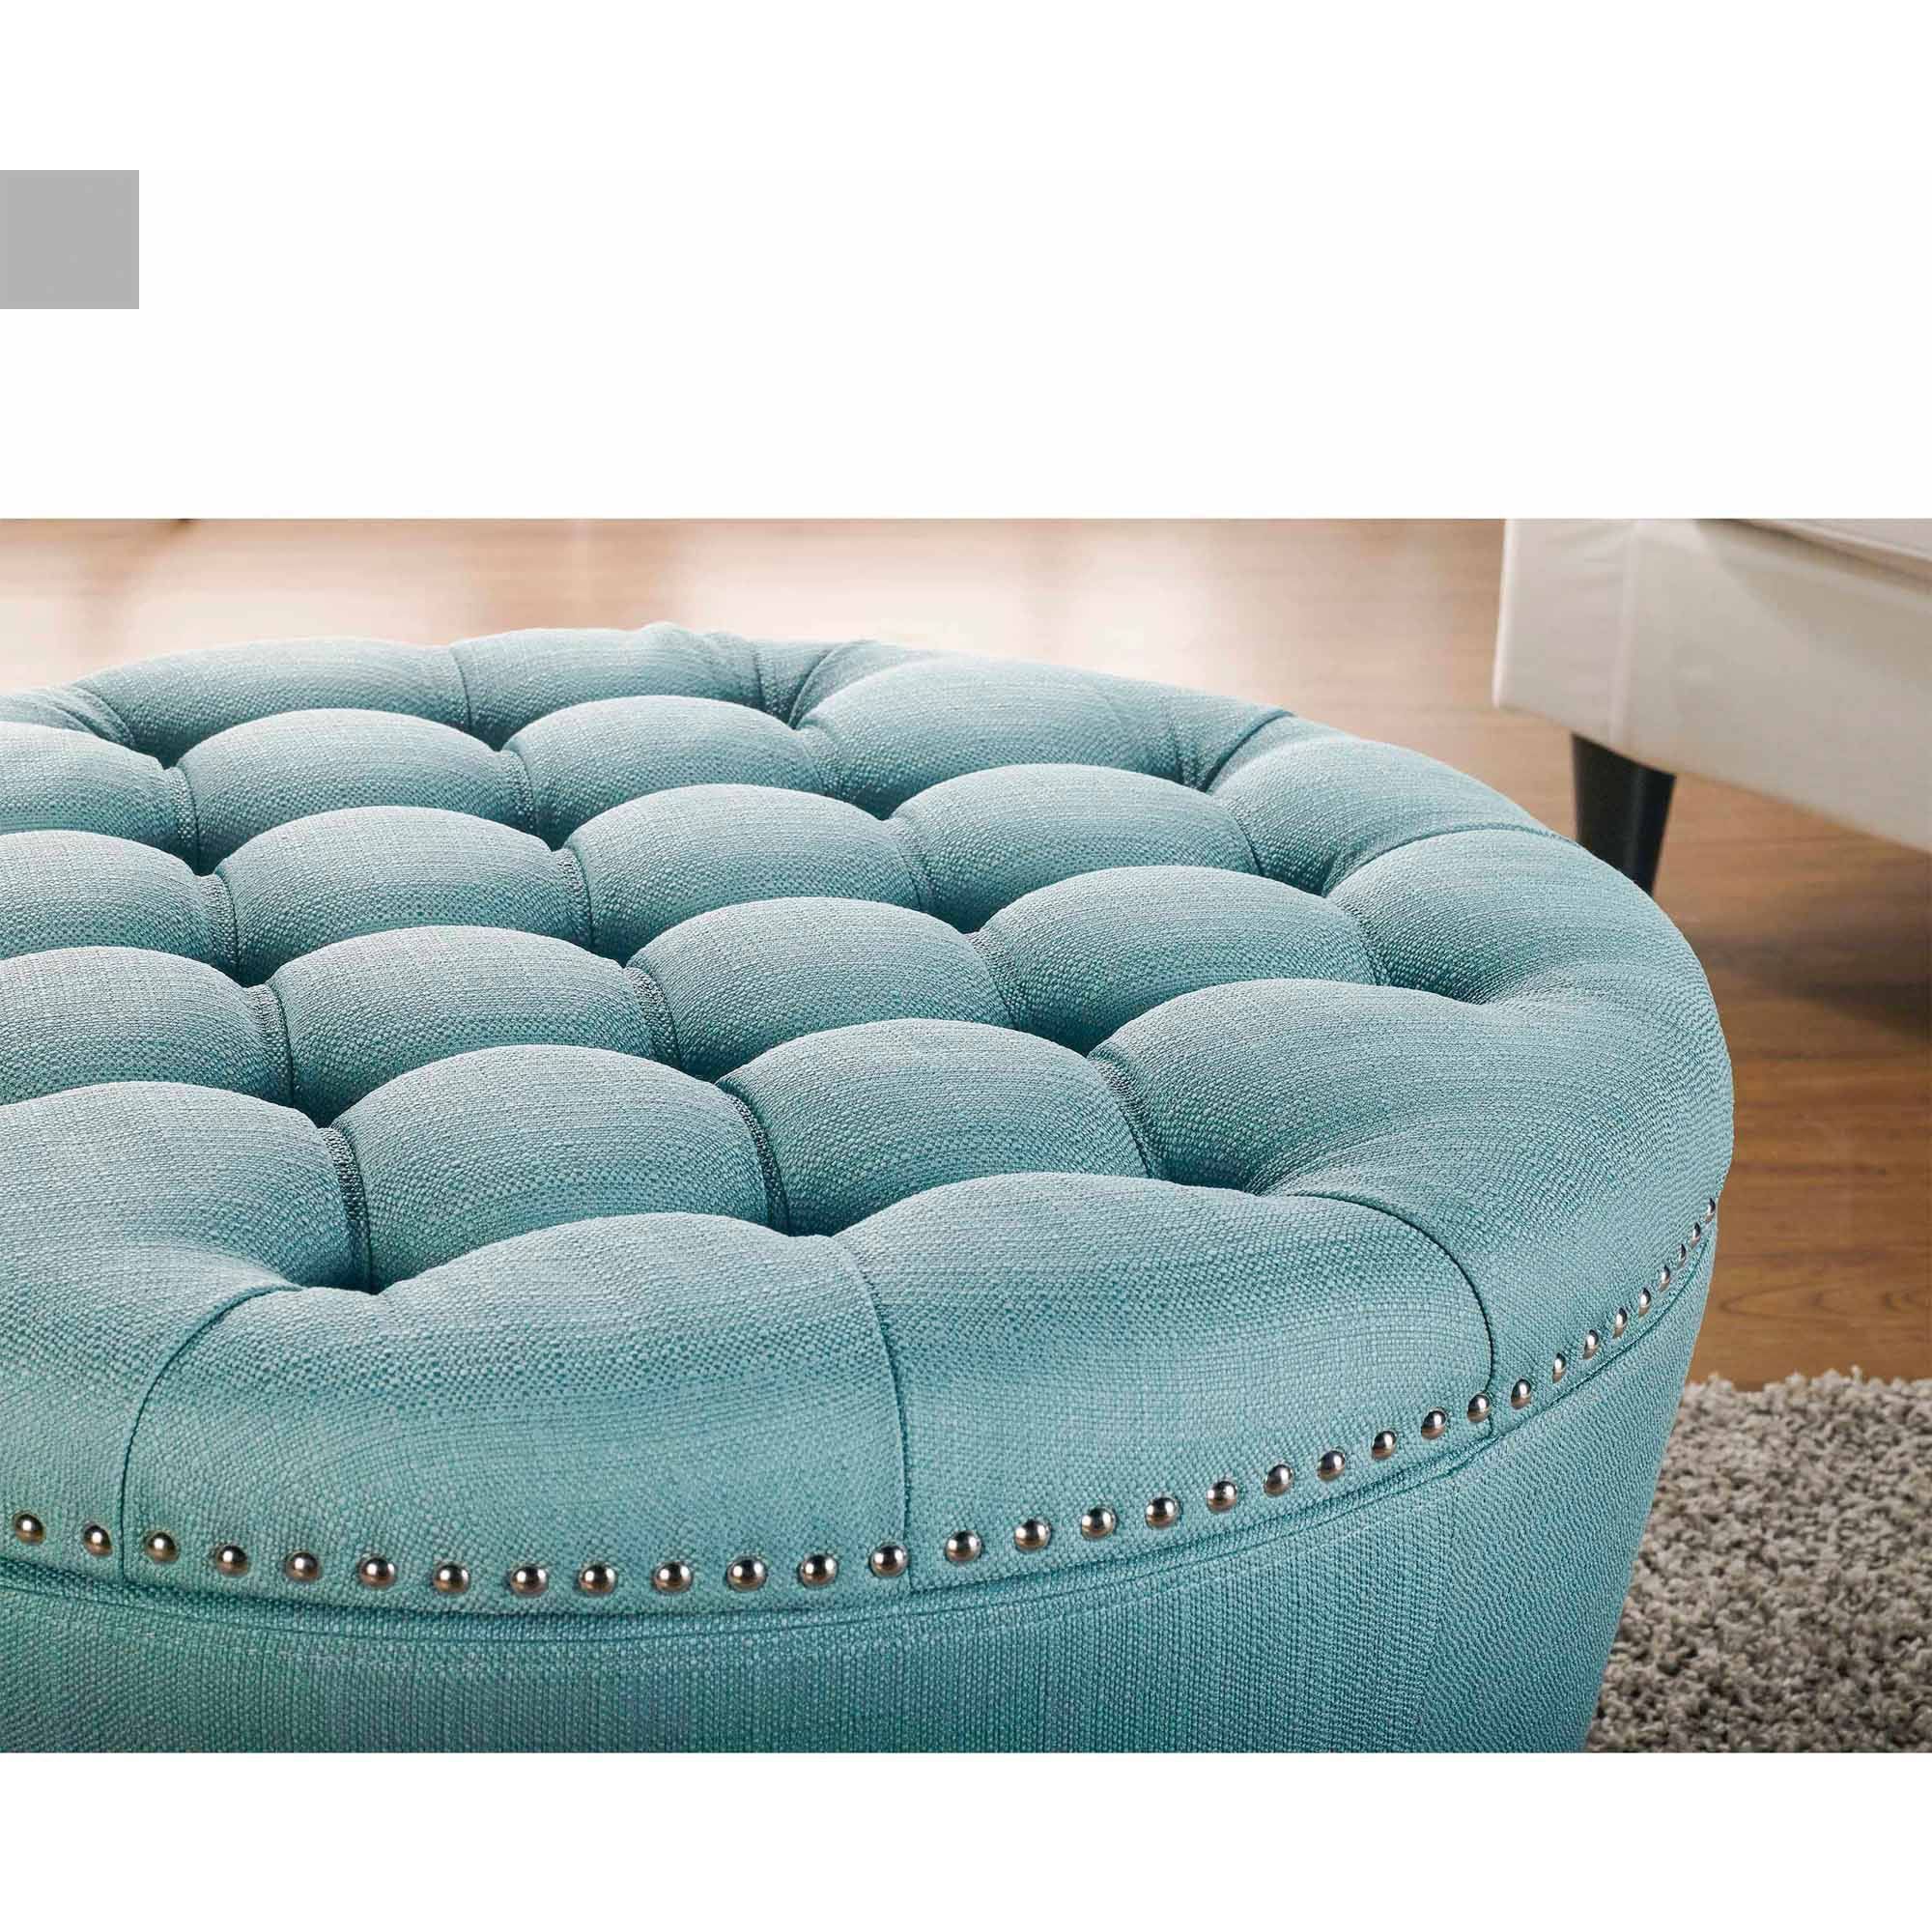 Storage Ottoman With Nail Heads Round Tufted Decorative Living Room Intended For Pouf Textured Blue Round Pouf Ottomans (View 17 of 20)